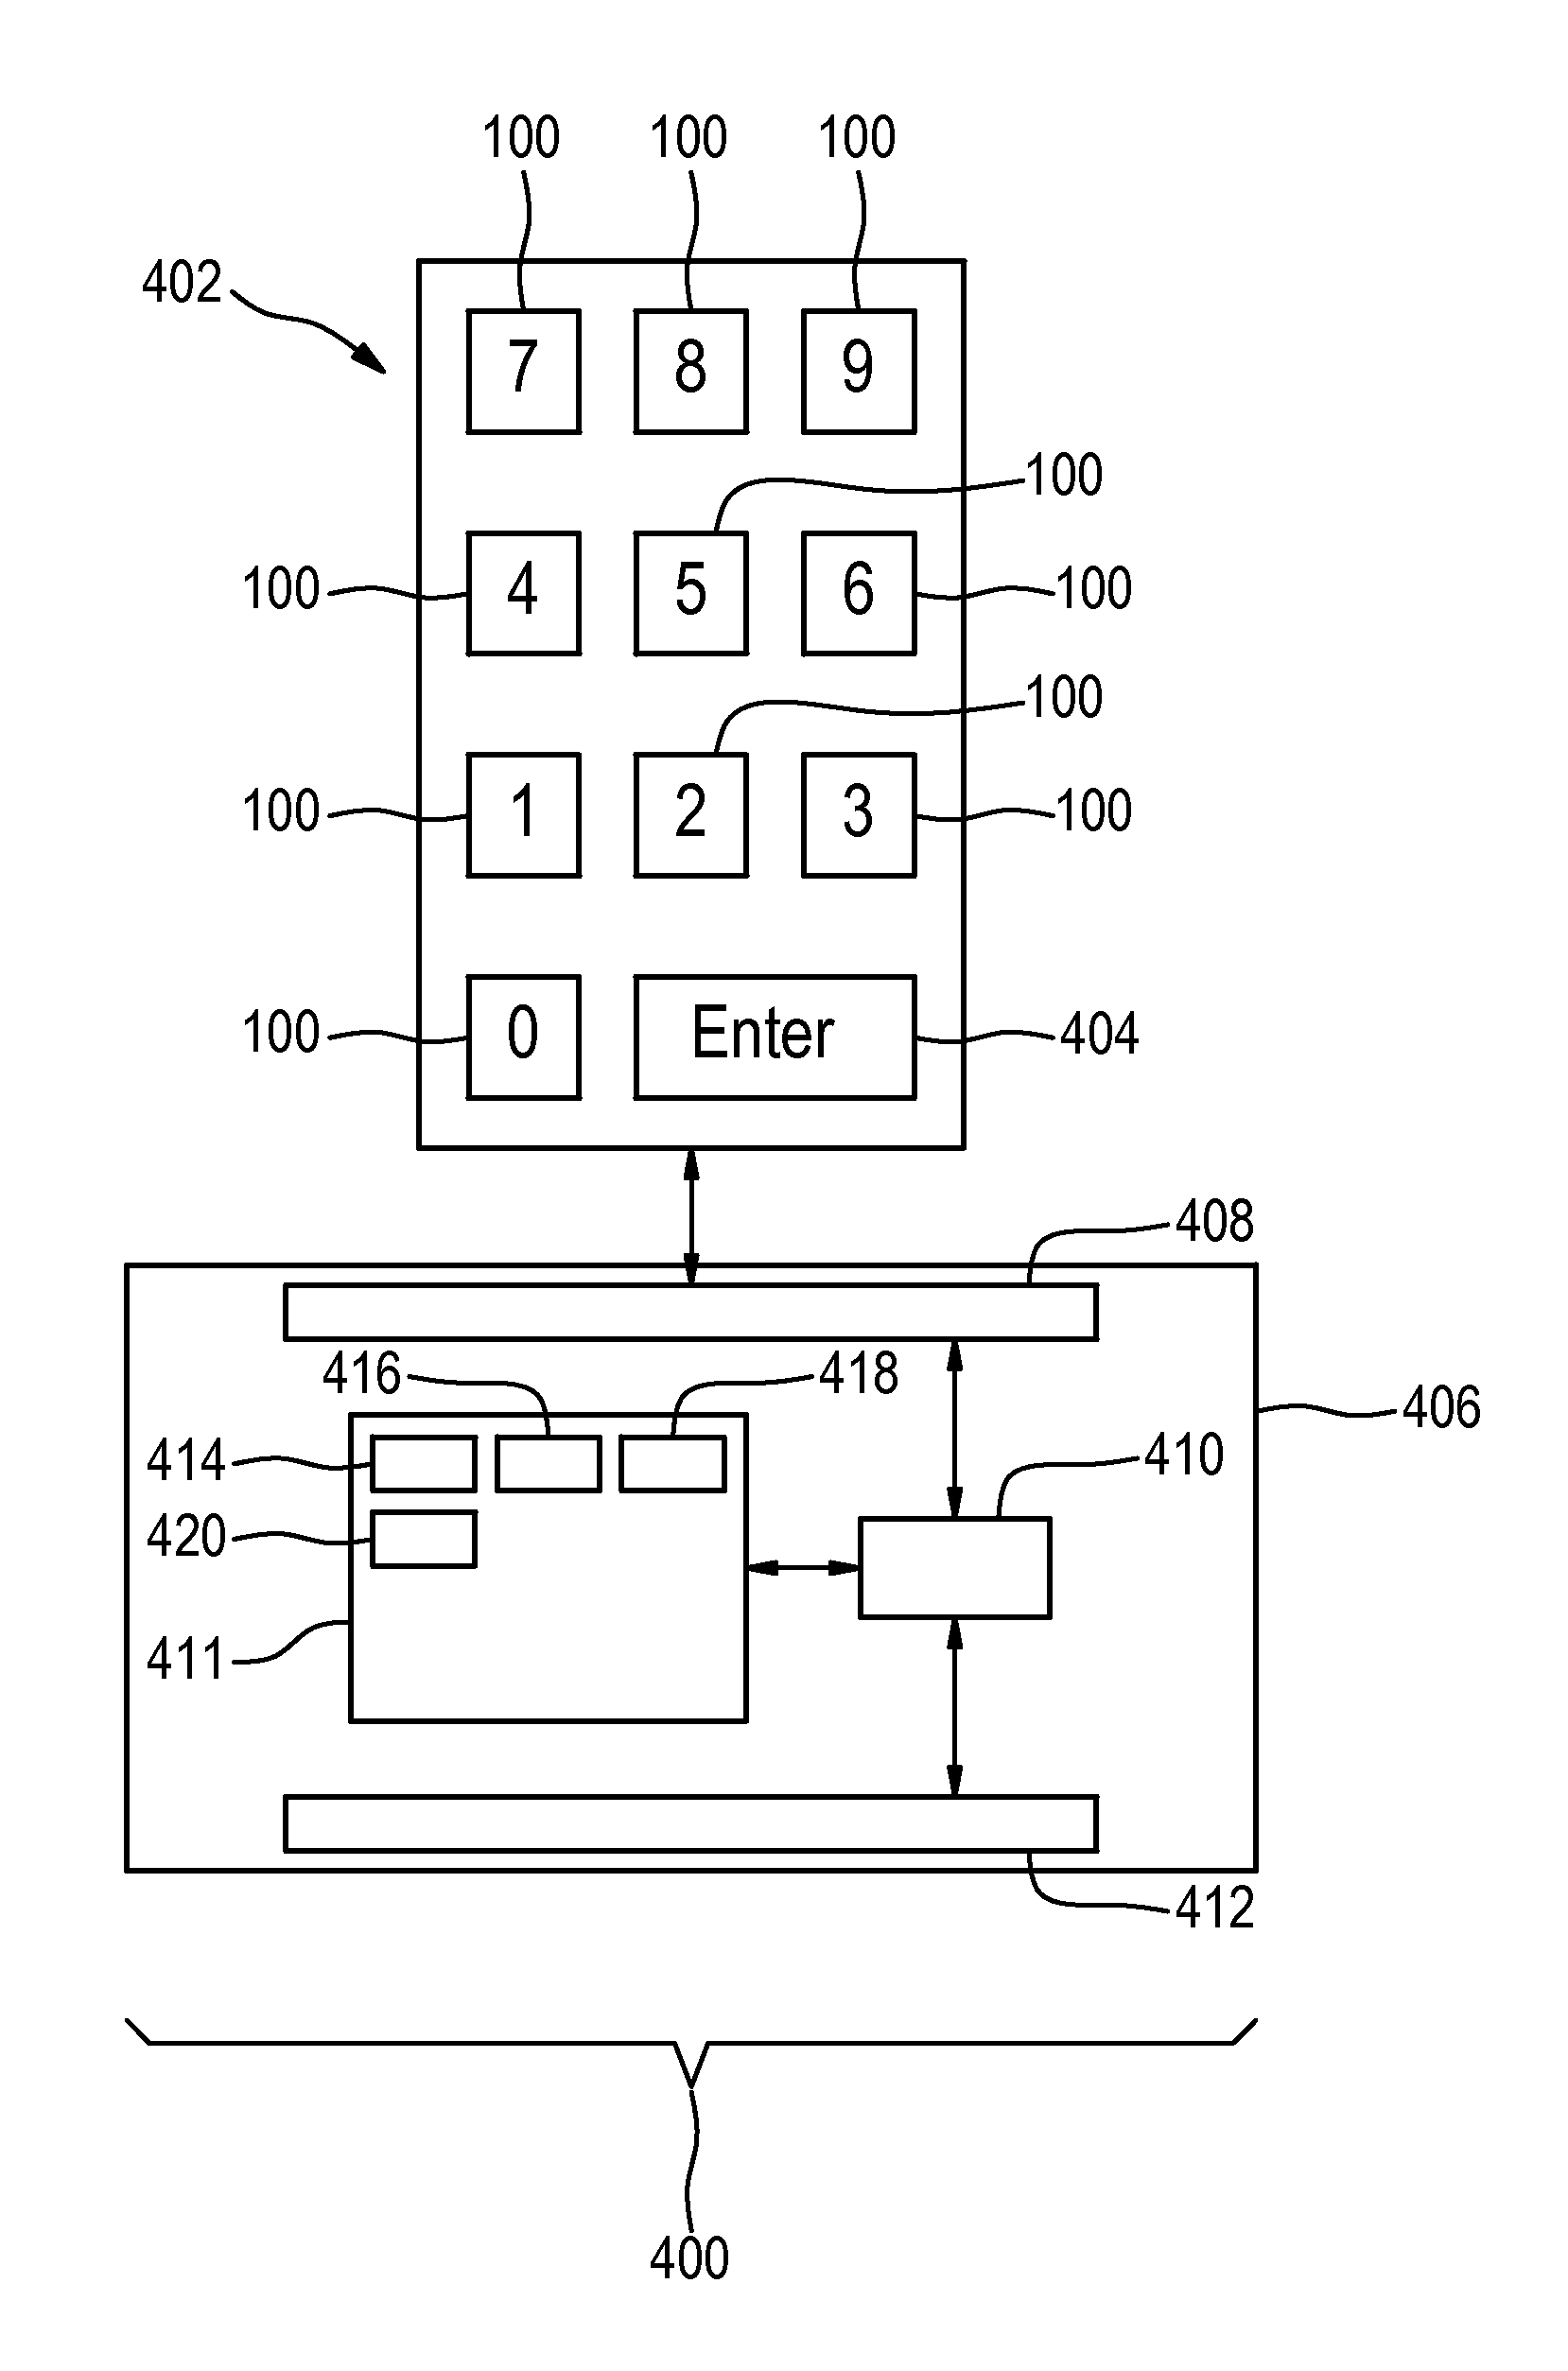 Keypad for the entry of authentication data